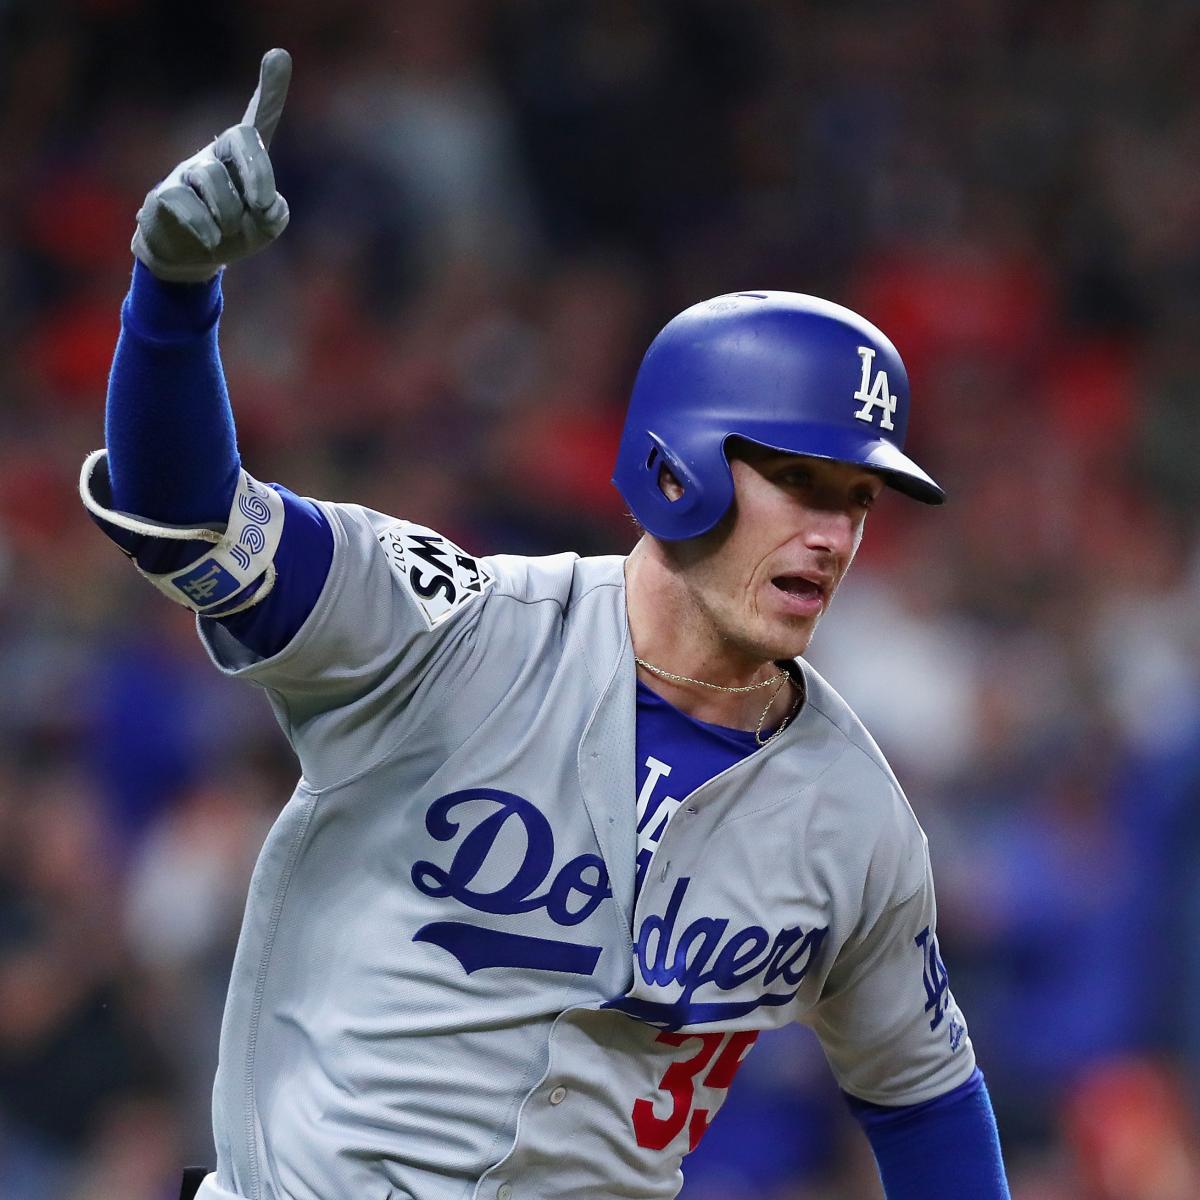 Cody Bellinger Comes Alive to Give Dodgers MuchNeeded Momentum in